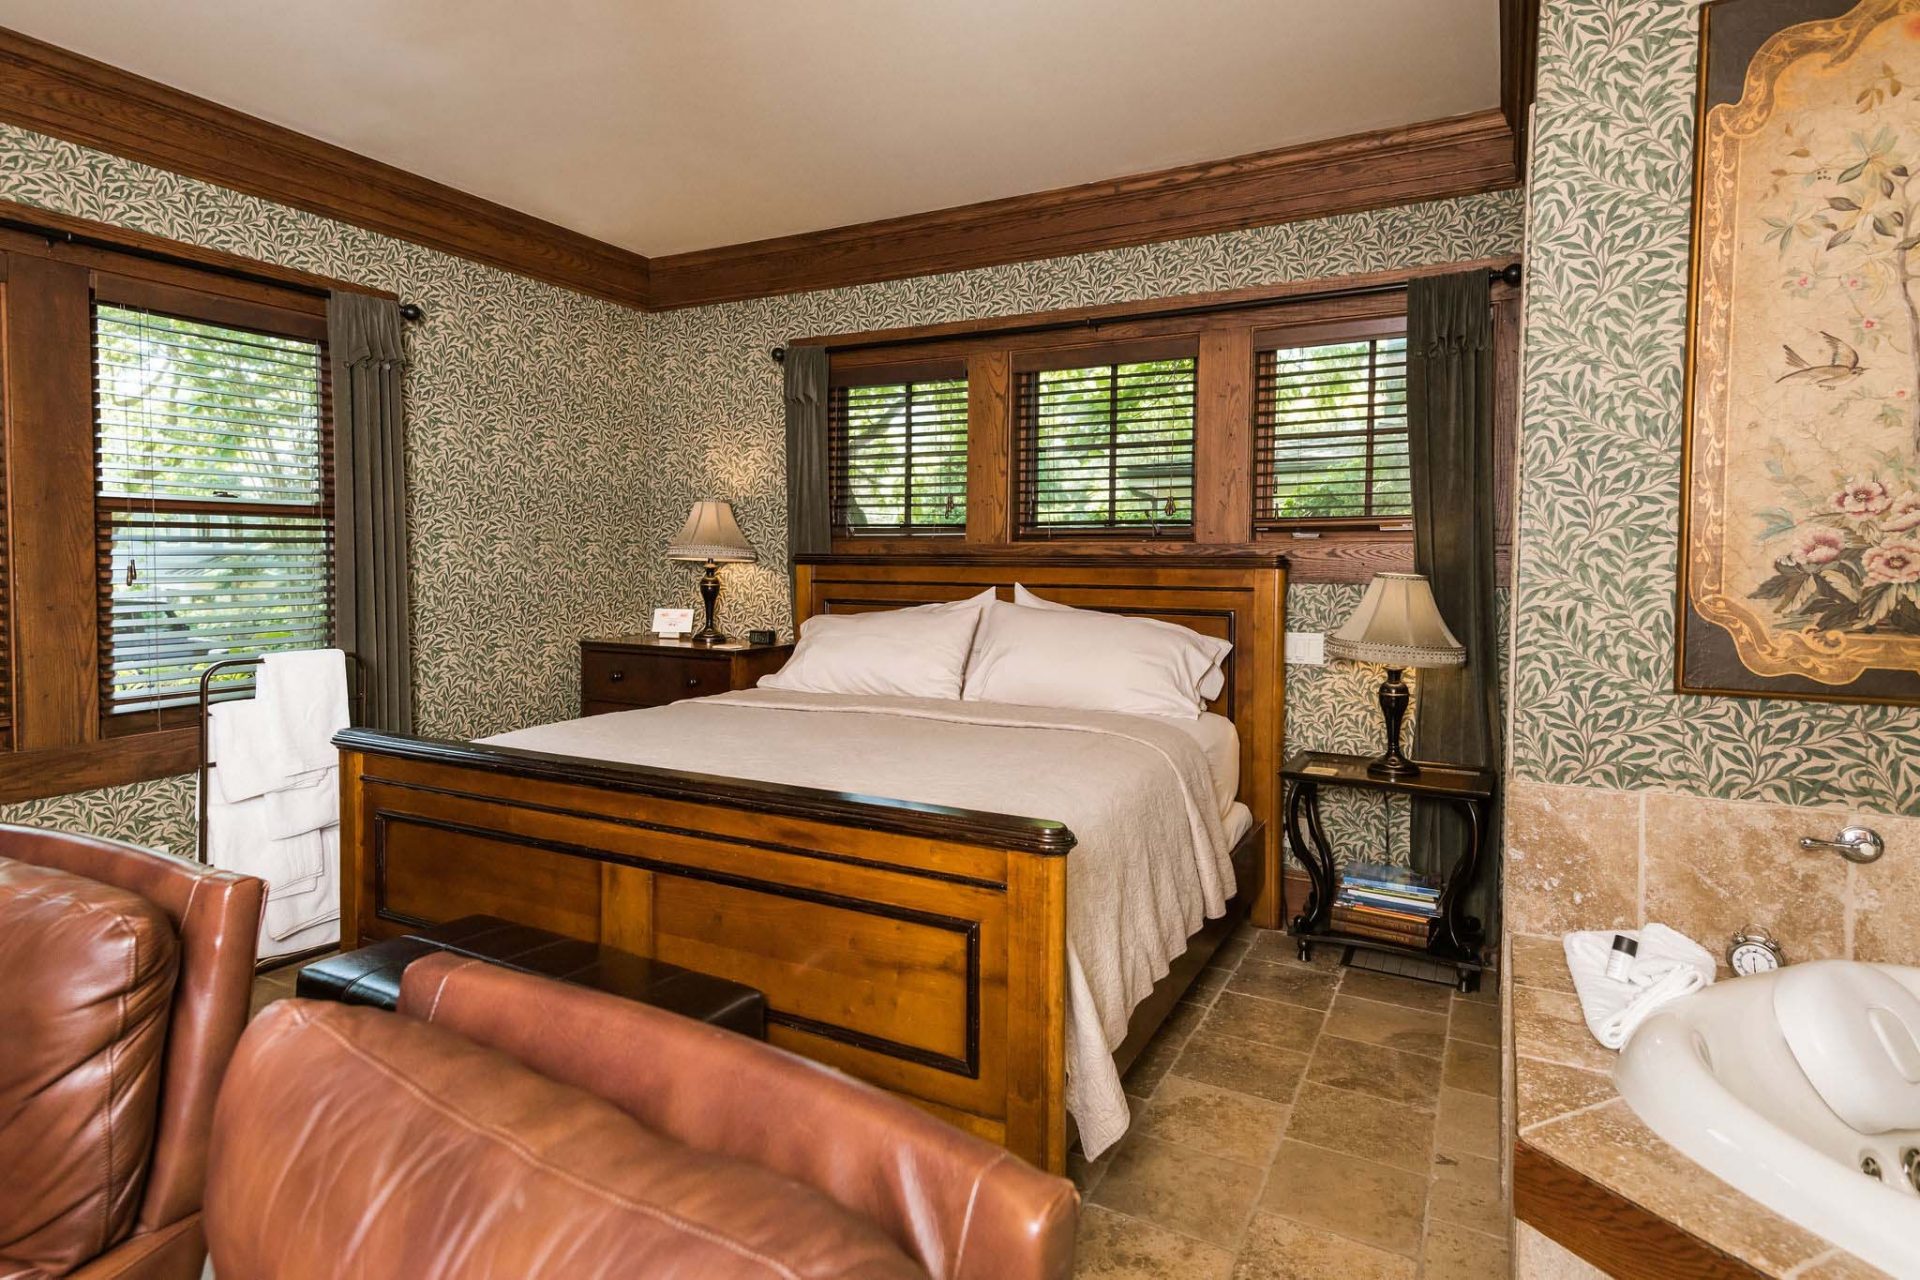 A pet-friendly room on the ground floor with beige tiles and a floral wallpaper. A king bed with two night stands and lamps, two leather club chairs, a multi-jet two-person Whirlpool.